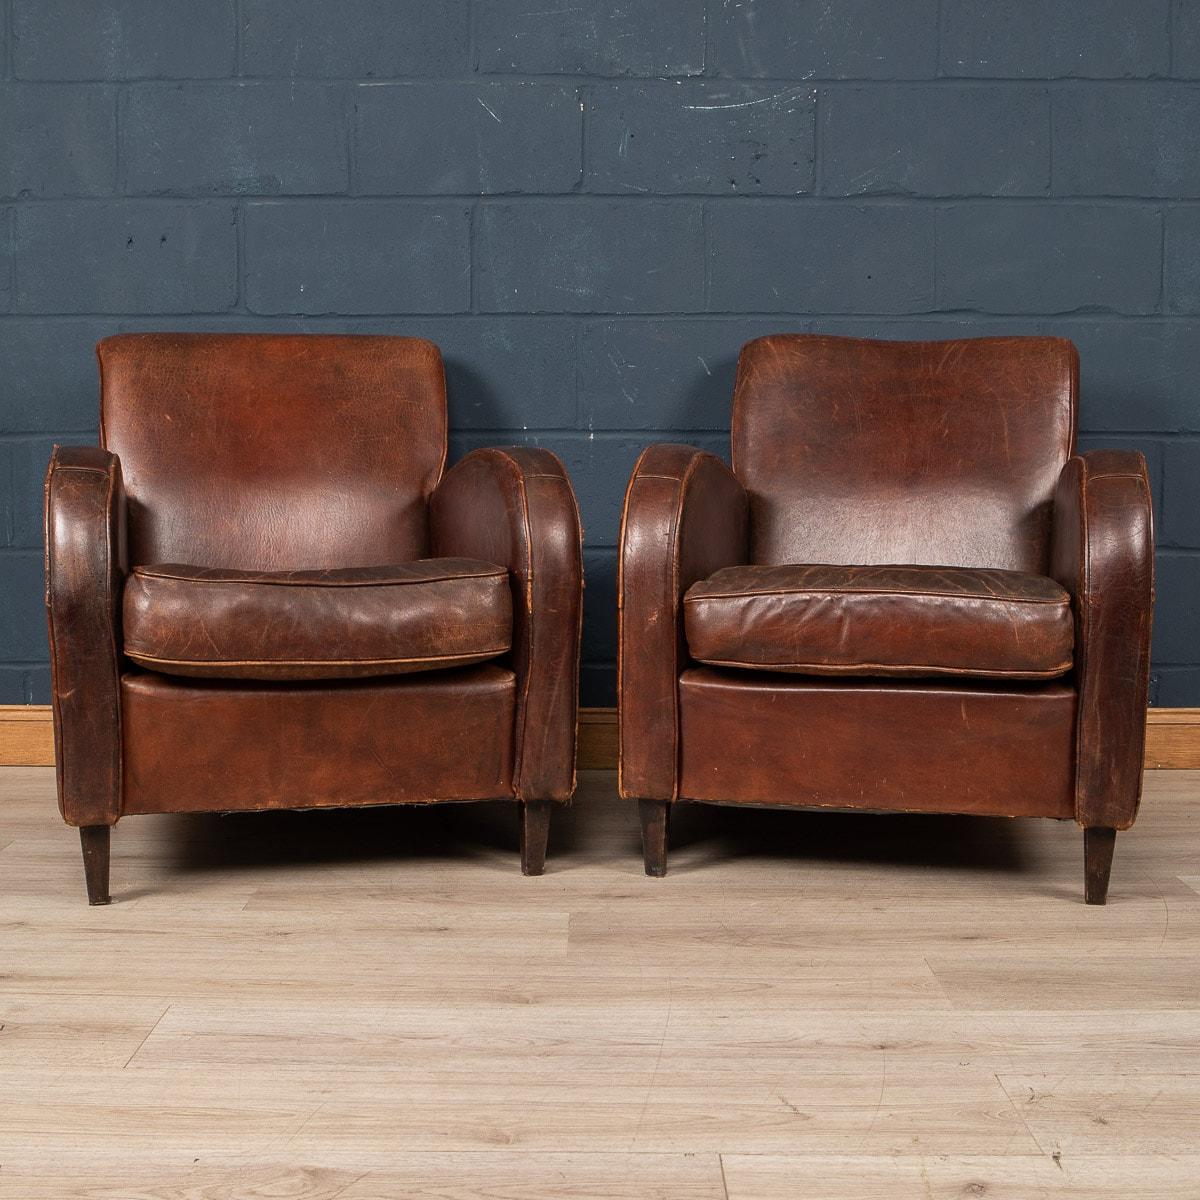 Showing superb patina and colour, this wonderful pair of club chairs were hand upholstered sheepskin leather in Holland by the finest craftsmen in the latter part of the 20th century.

The design and craftsmanship of sheep leather furniture was